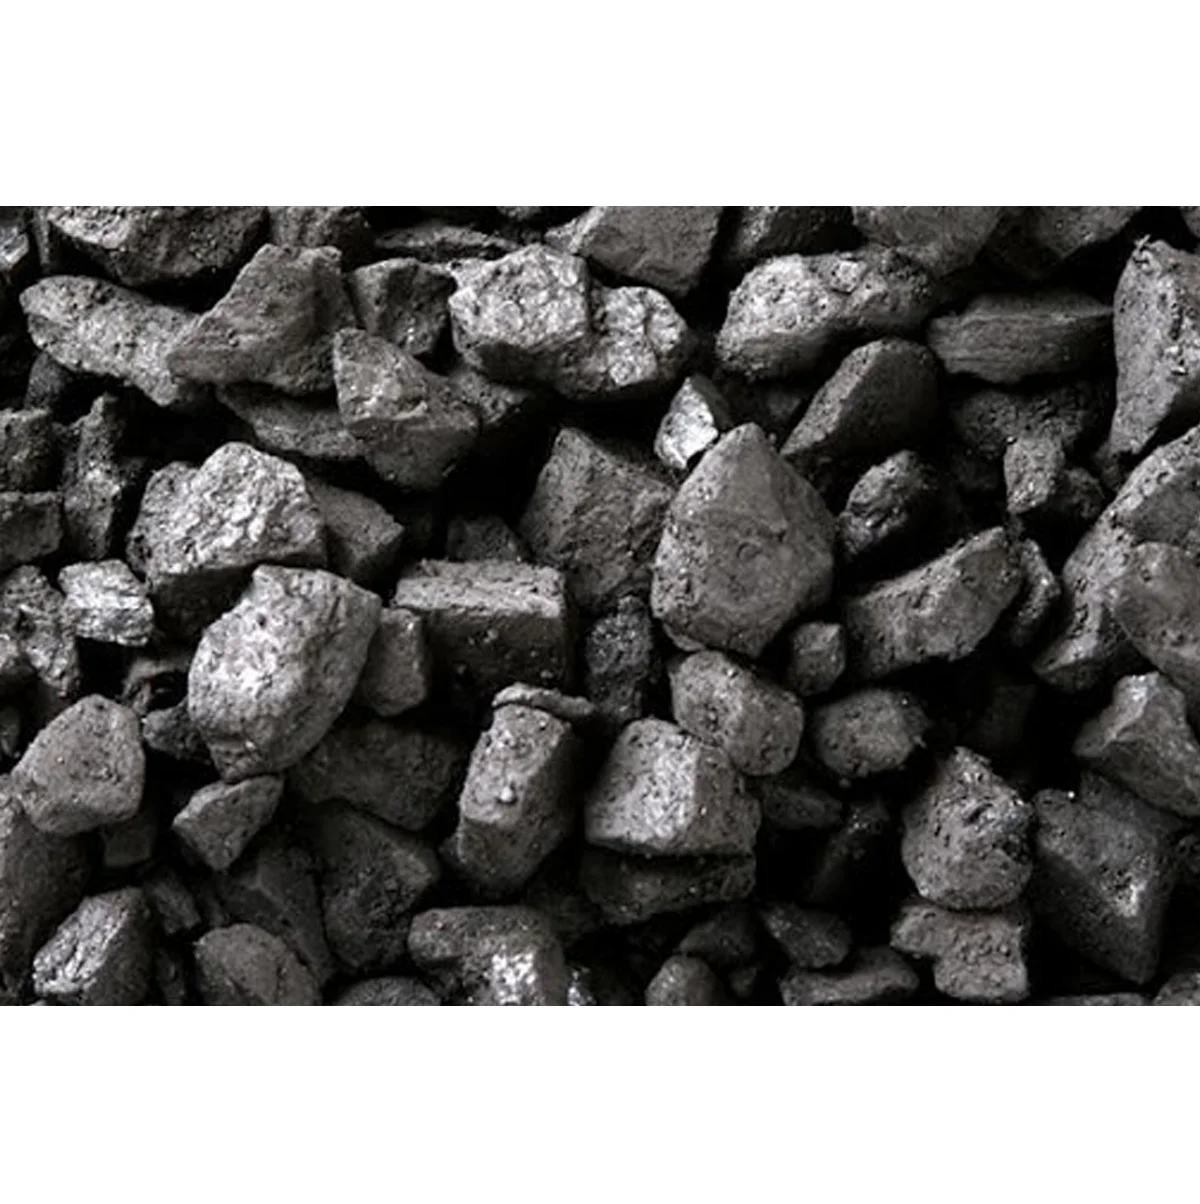 Steam coal is used for фото 53